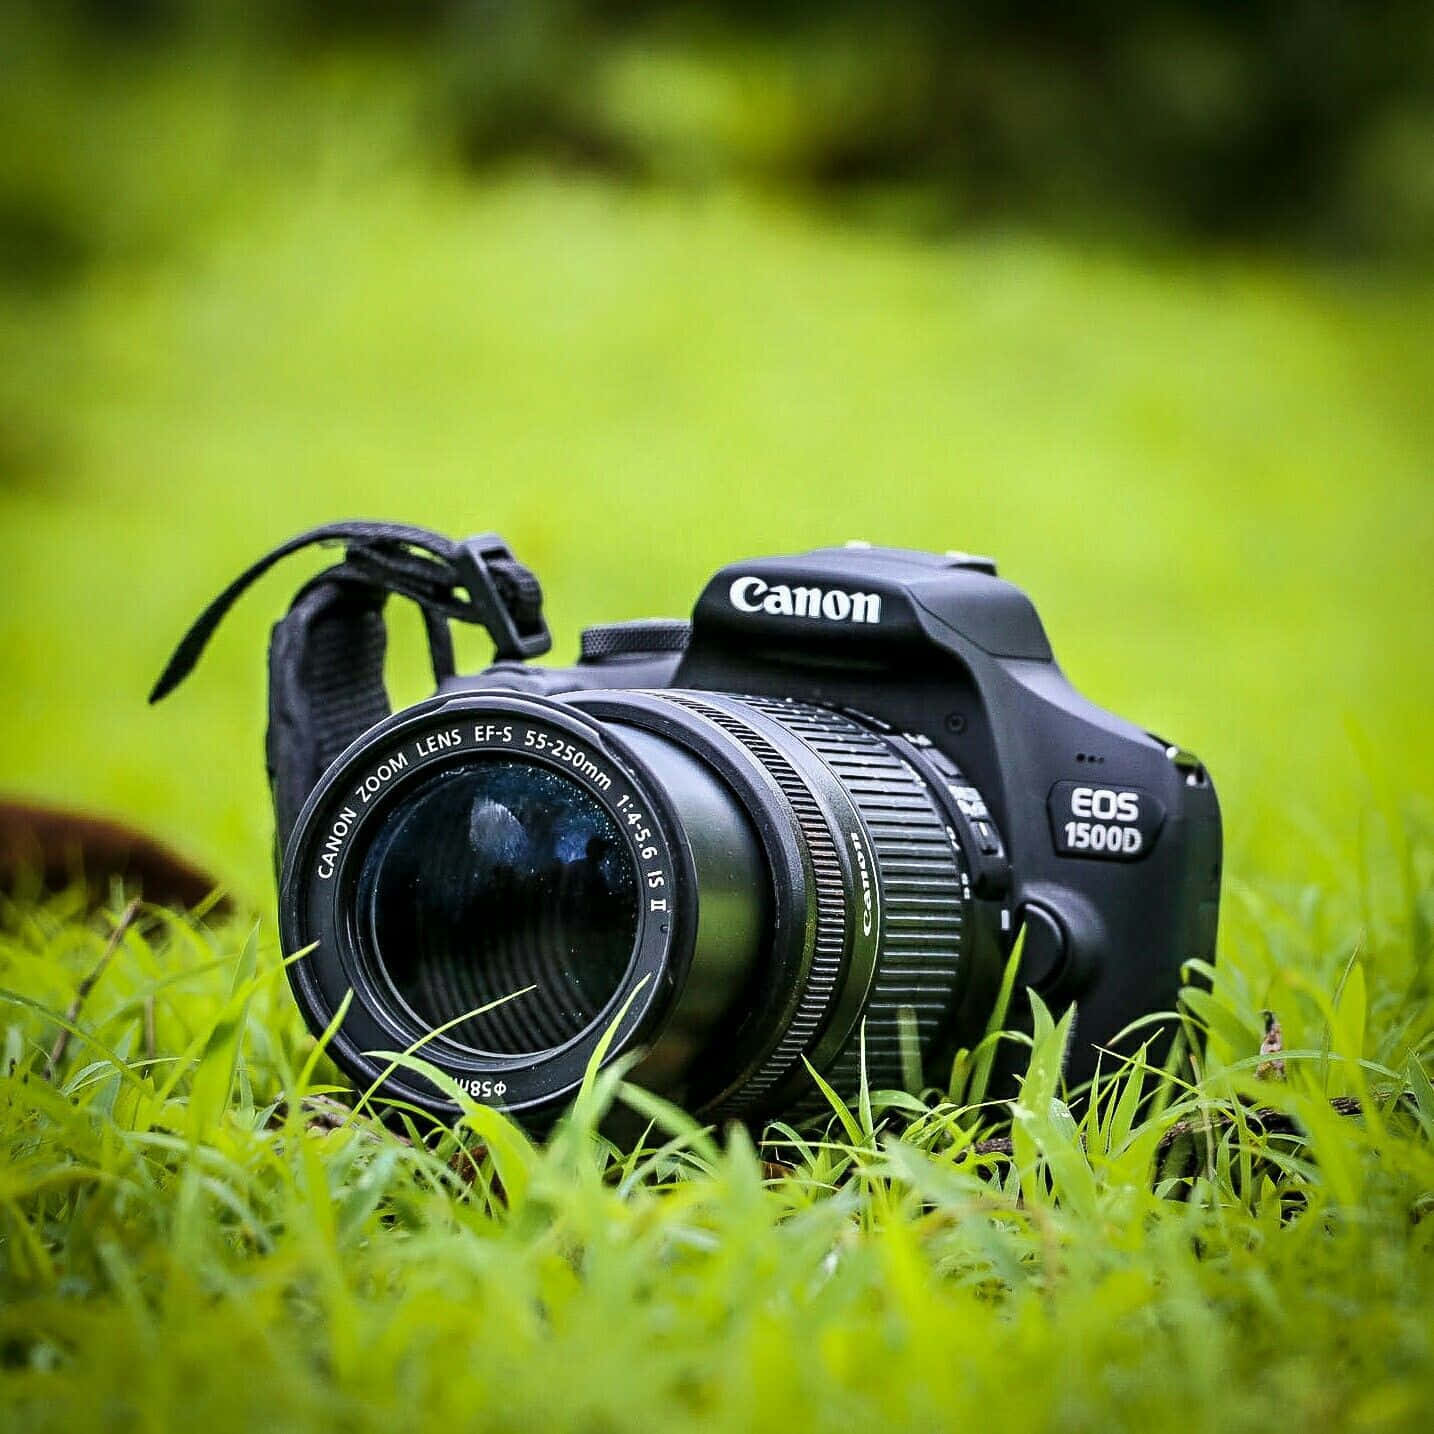 Canon Photography Camera On Grass Background